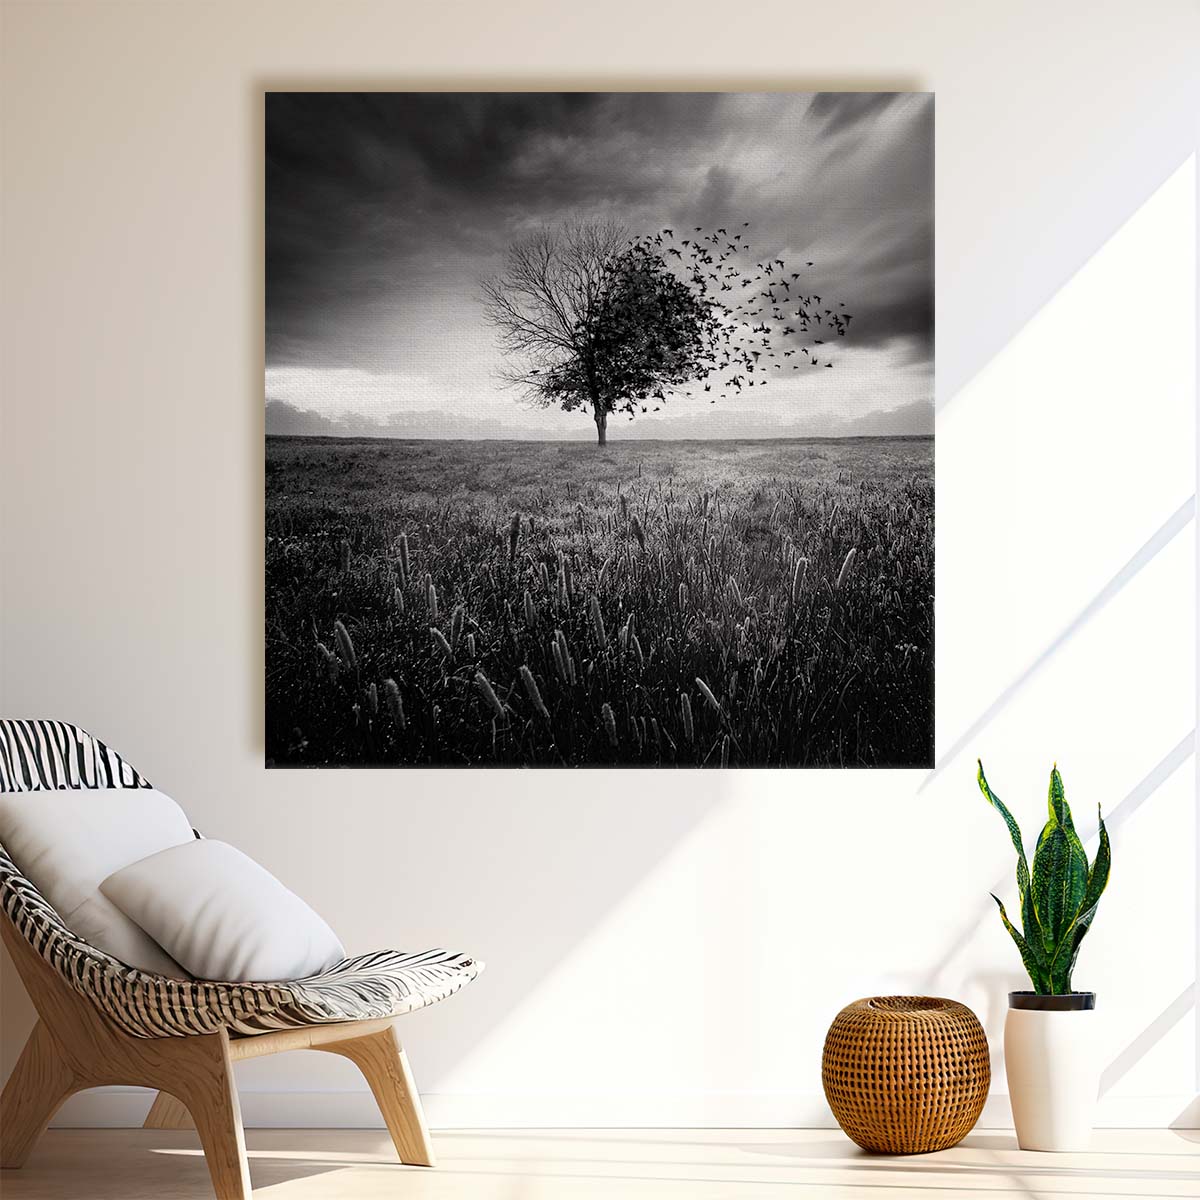 Autumnal Solitude in Monochrome Landscape Photography Wall Art by Luxuriance Designs. Made in USA.